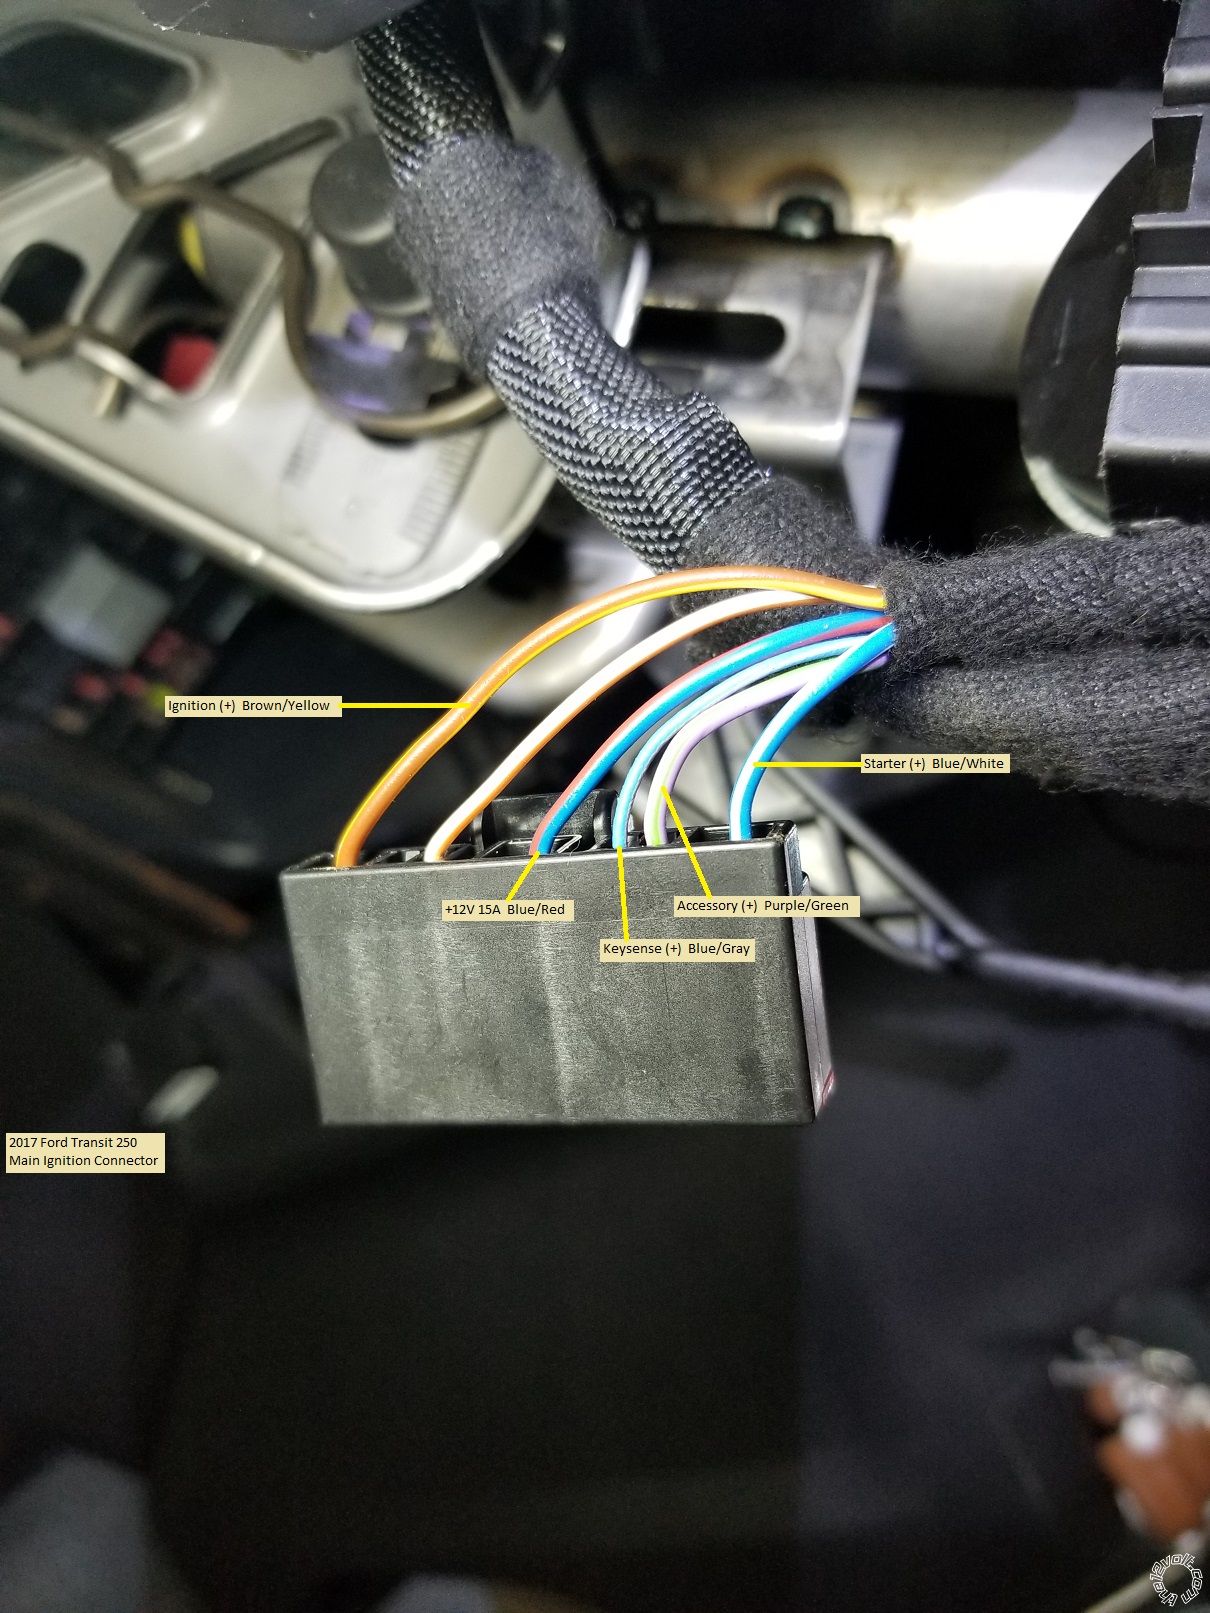 2015-2018 Ford Transit Remote Start Pictorial -- posted image.